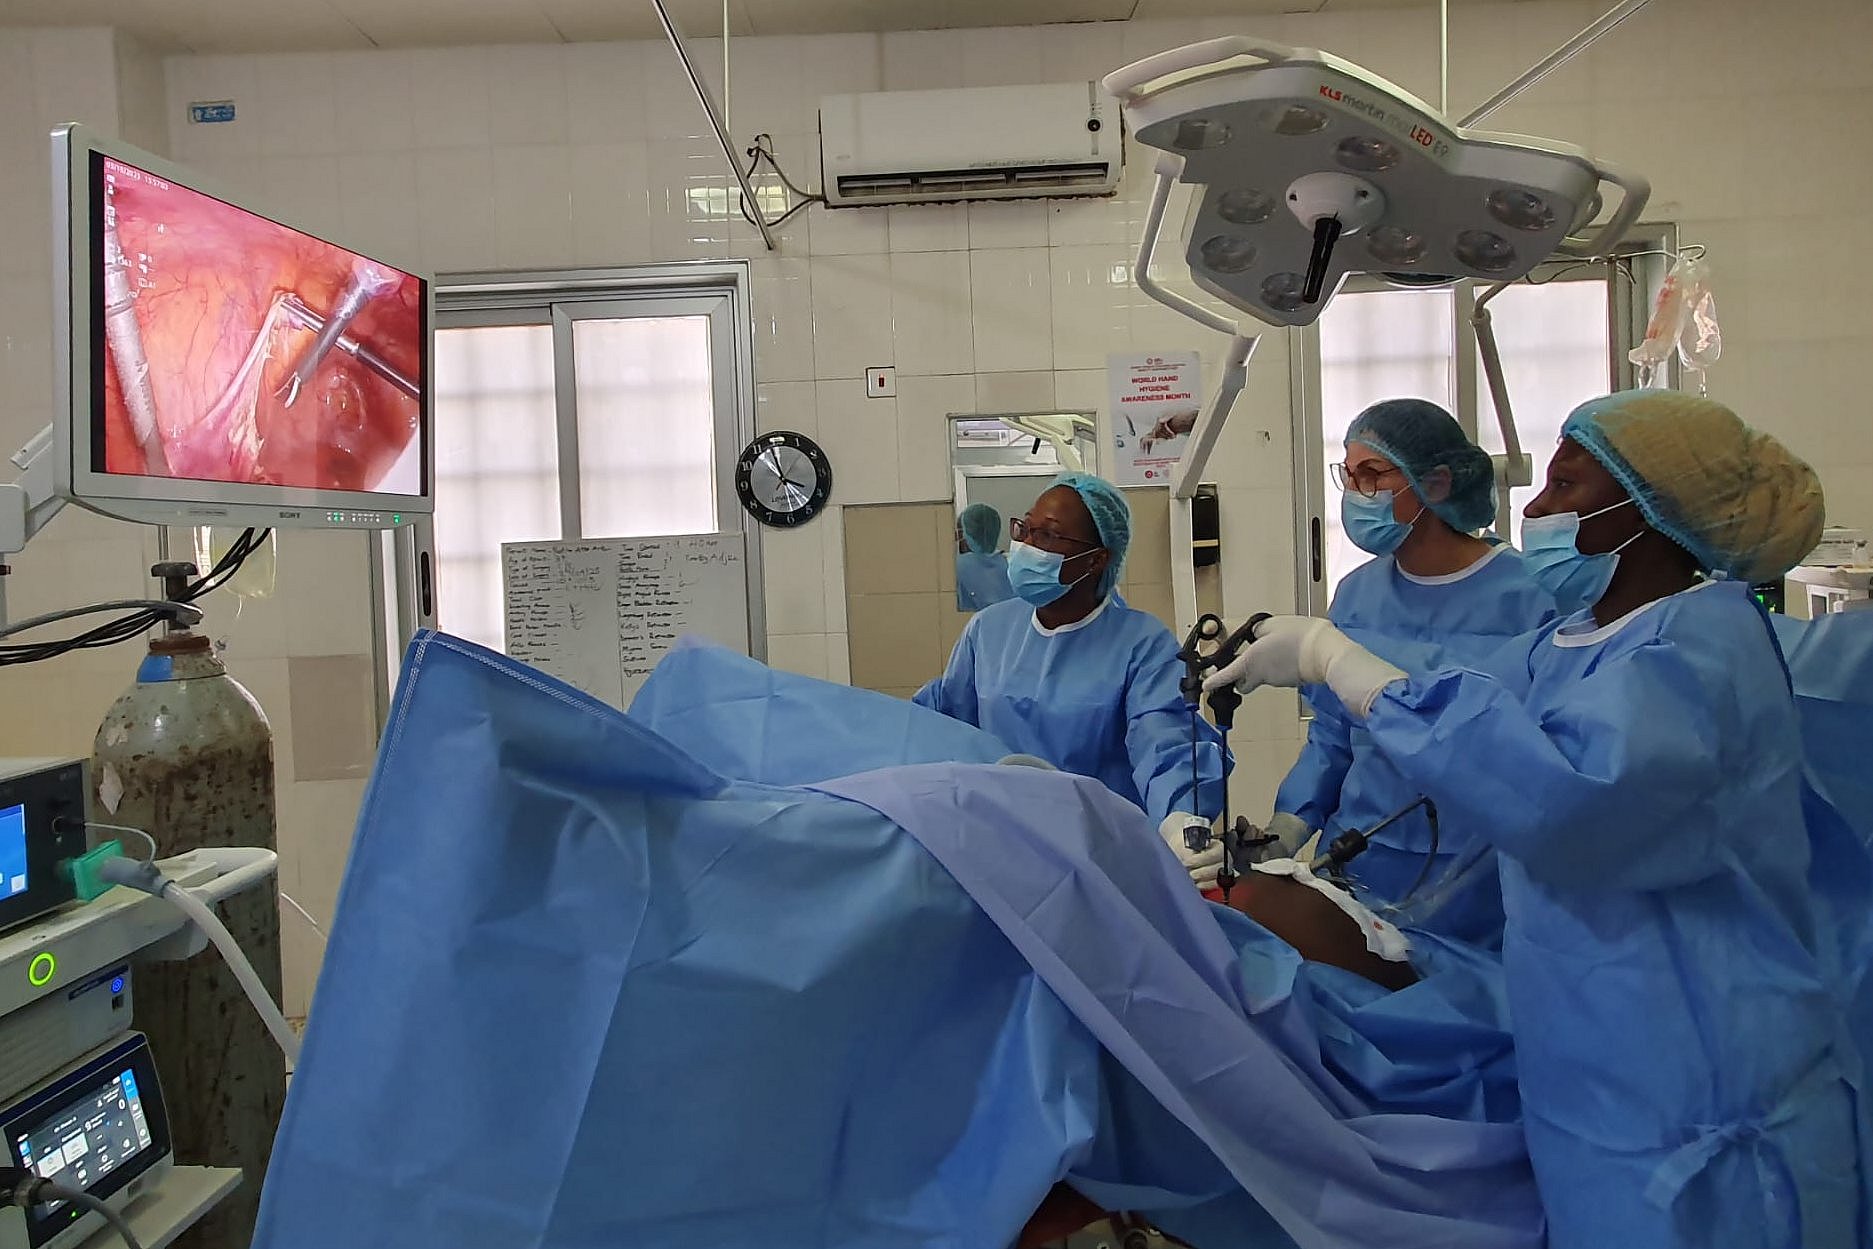 Two doctors and a surgical nurse operate and view the patient's interior on a screen